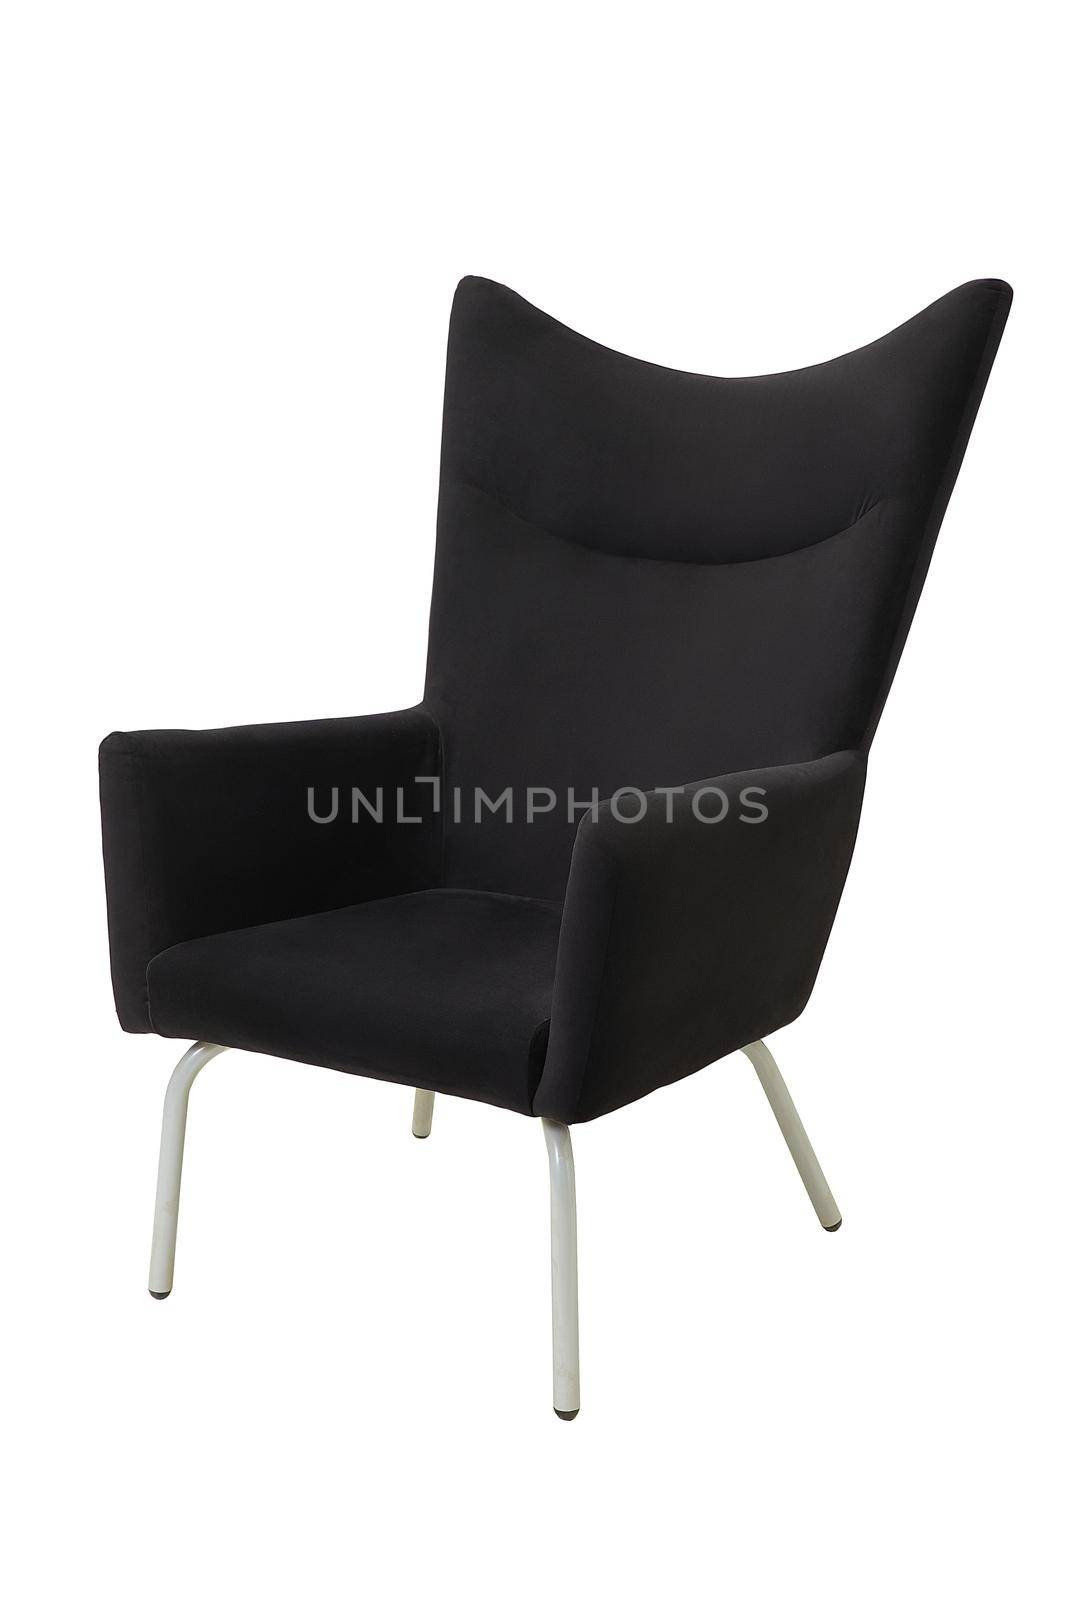 black office fabric armchair on metal legs isolated on white background, side view. modern furniture, interior, home design